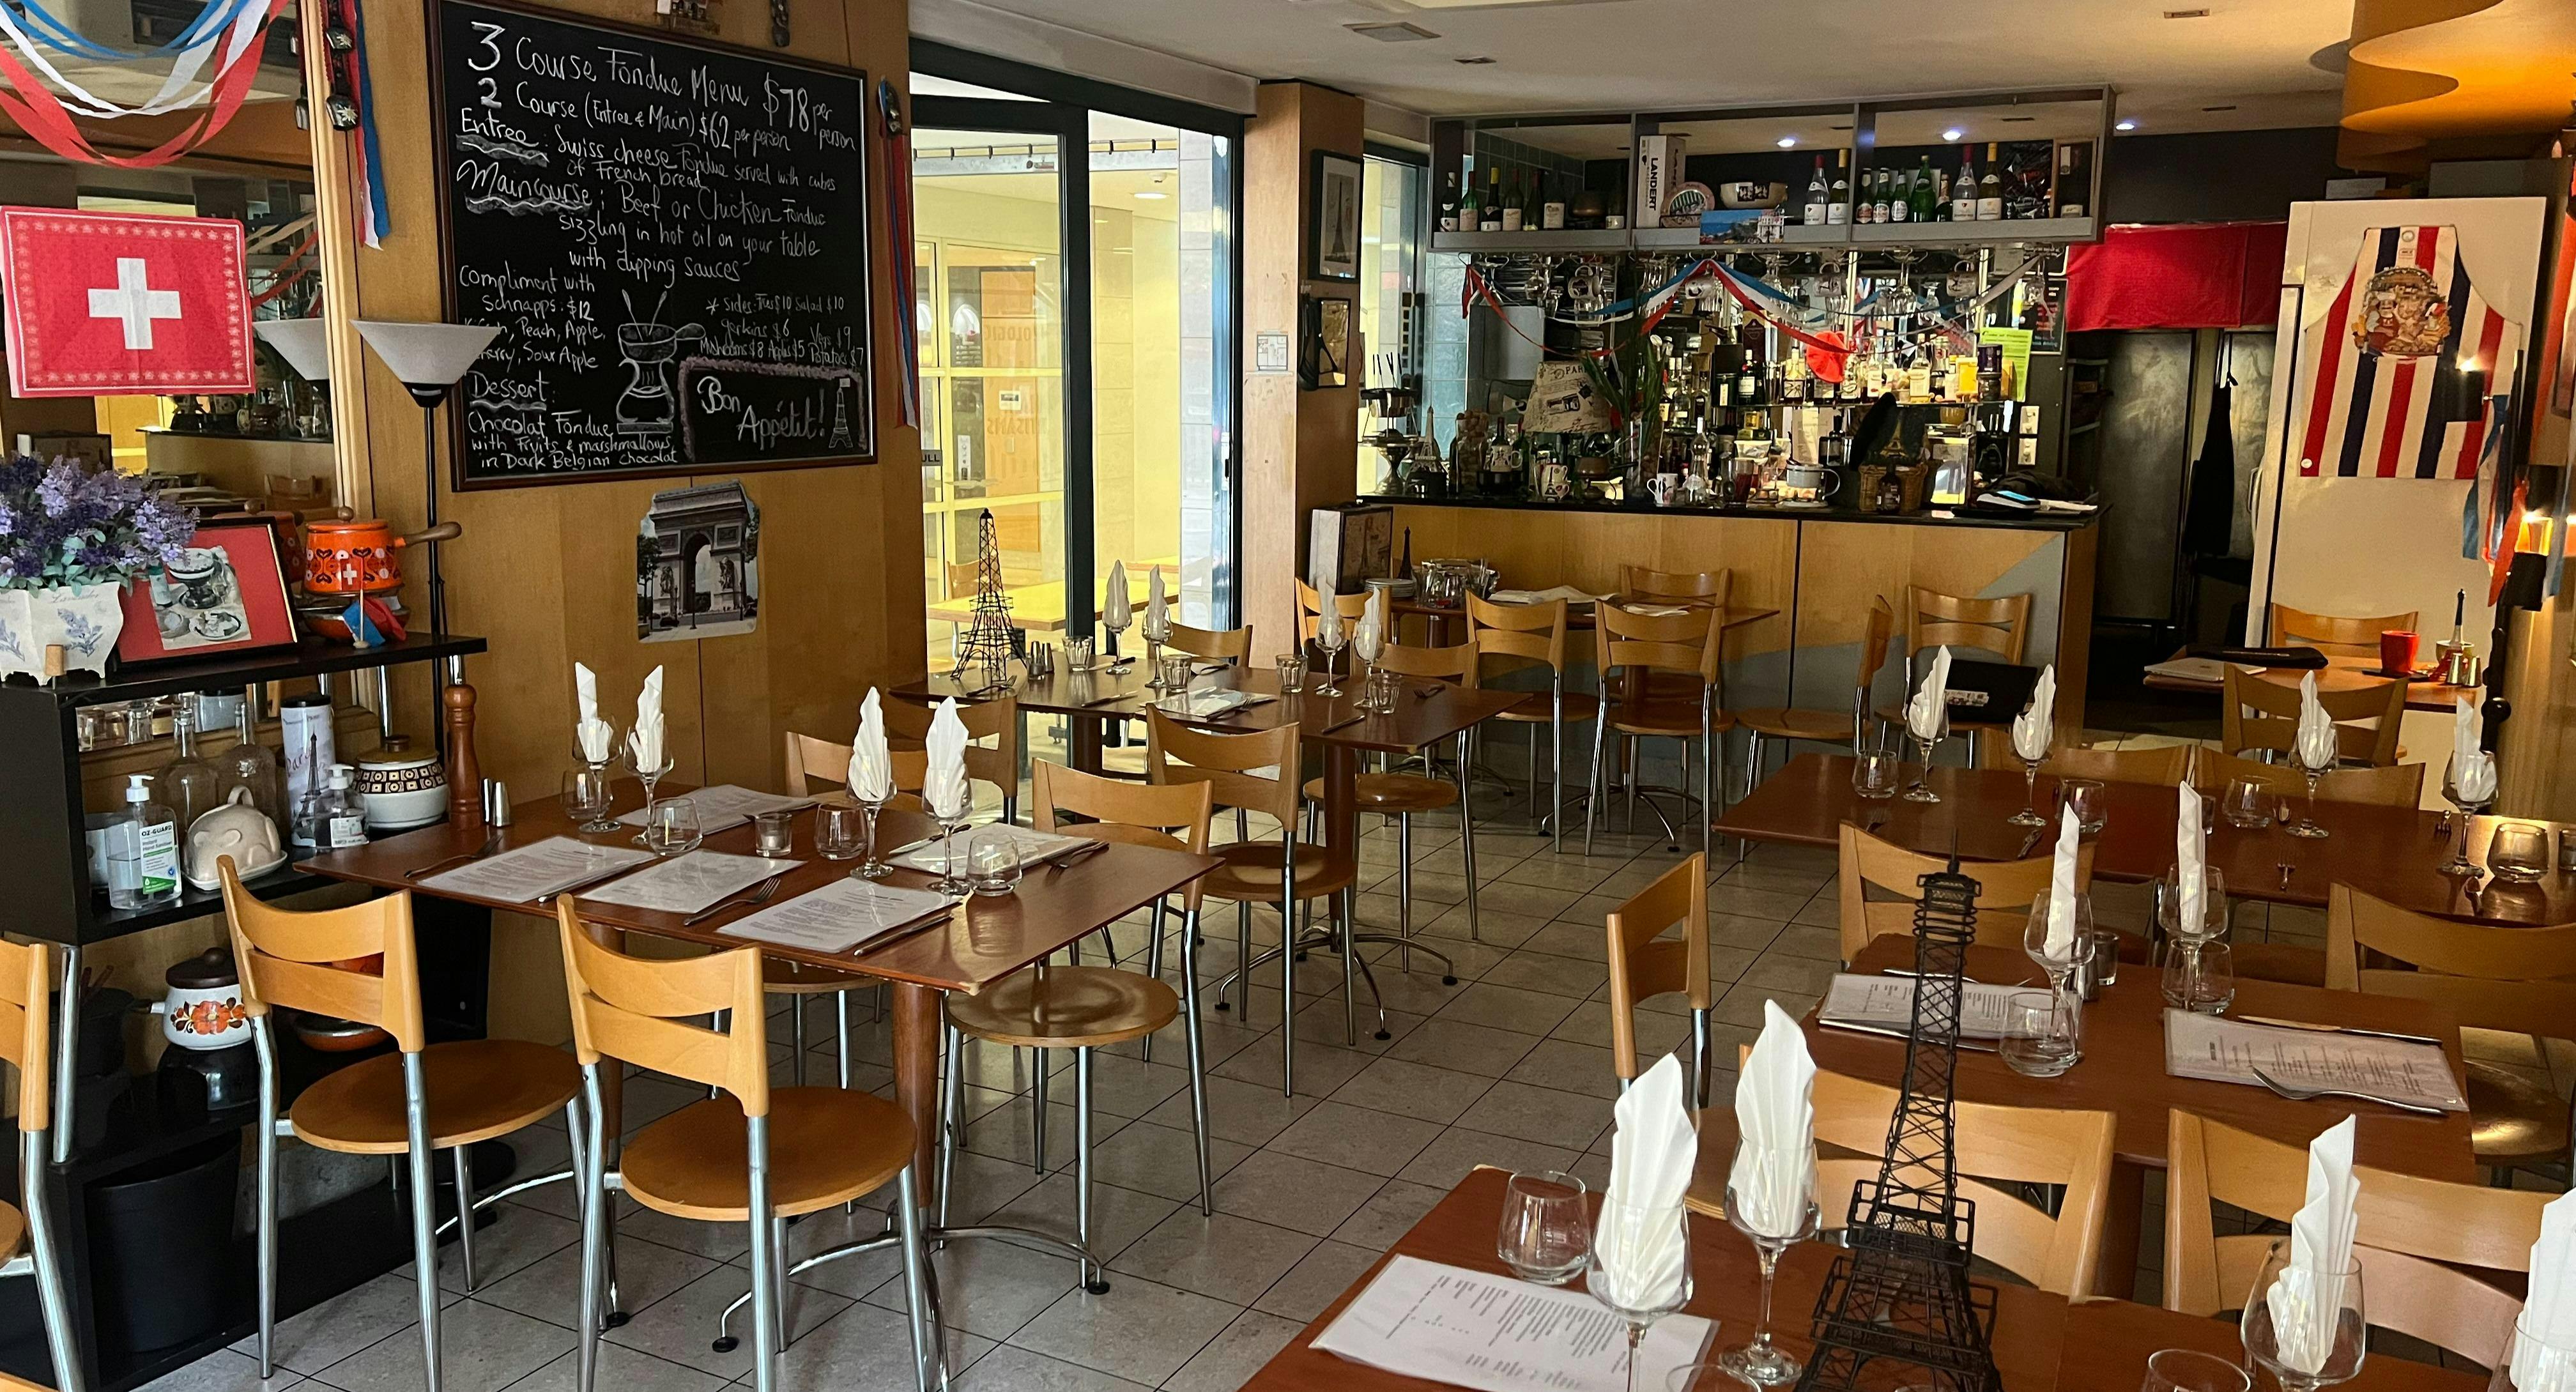 Bookings at Cj's French & Fondue Restaurant in Neutral Bay, Sydney